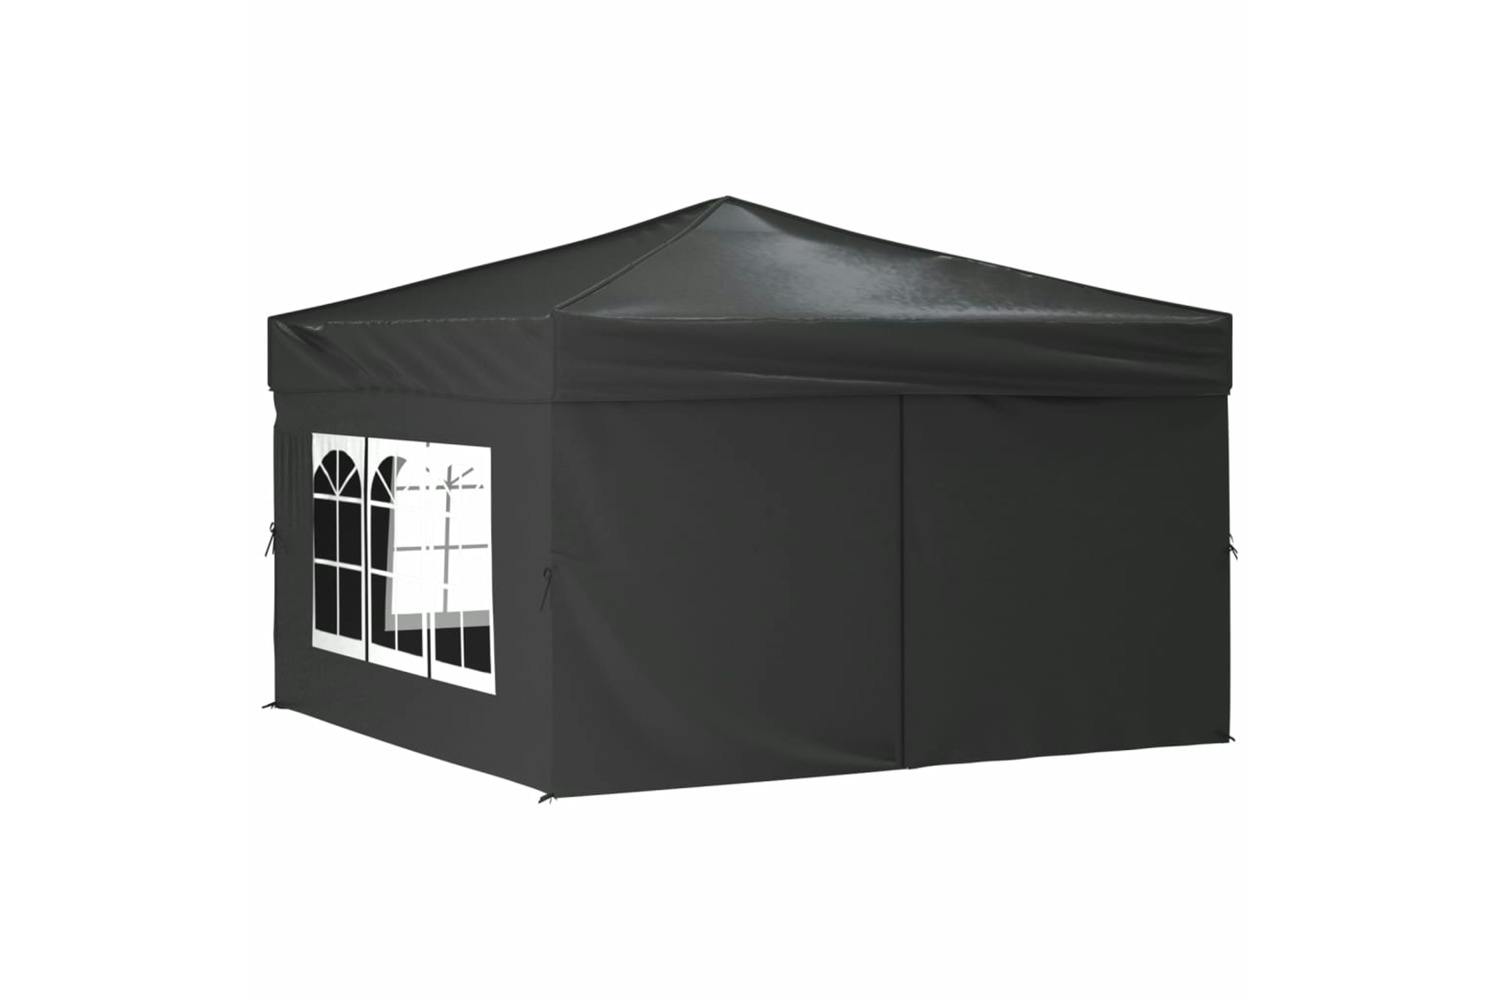 Vidaxl 93523 Folding Party Tent With Sidewalls Anthracite 3x3 M